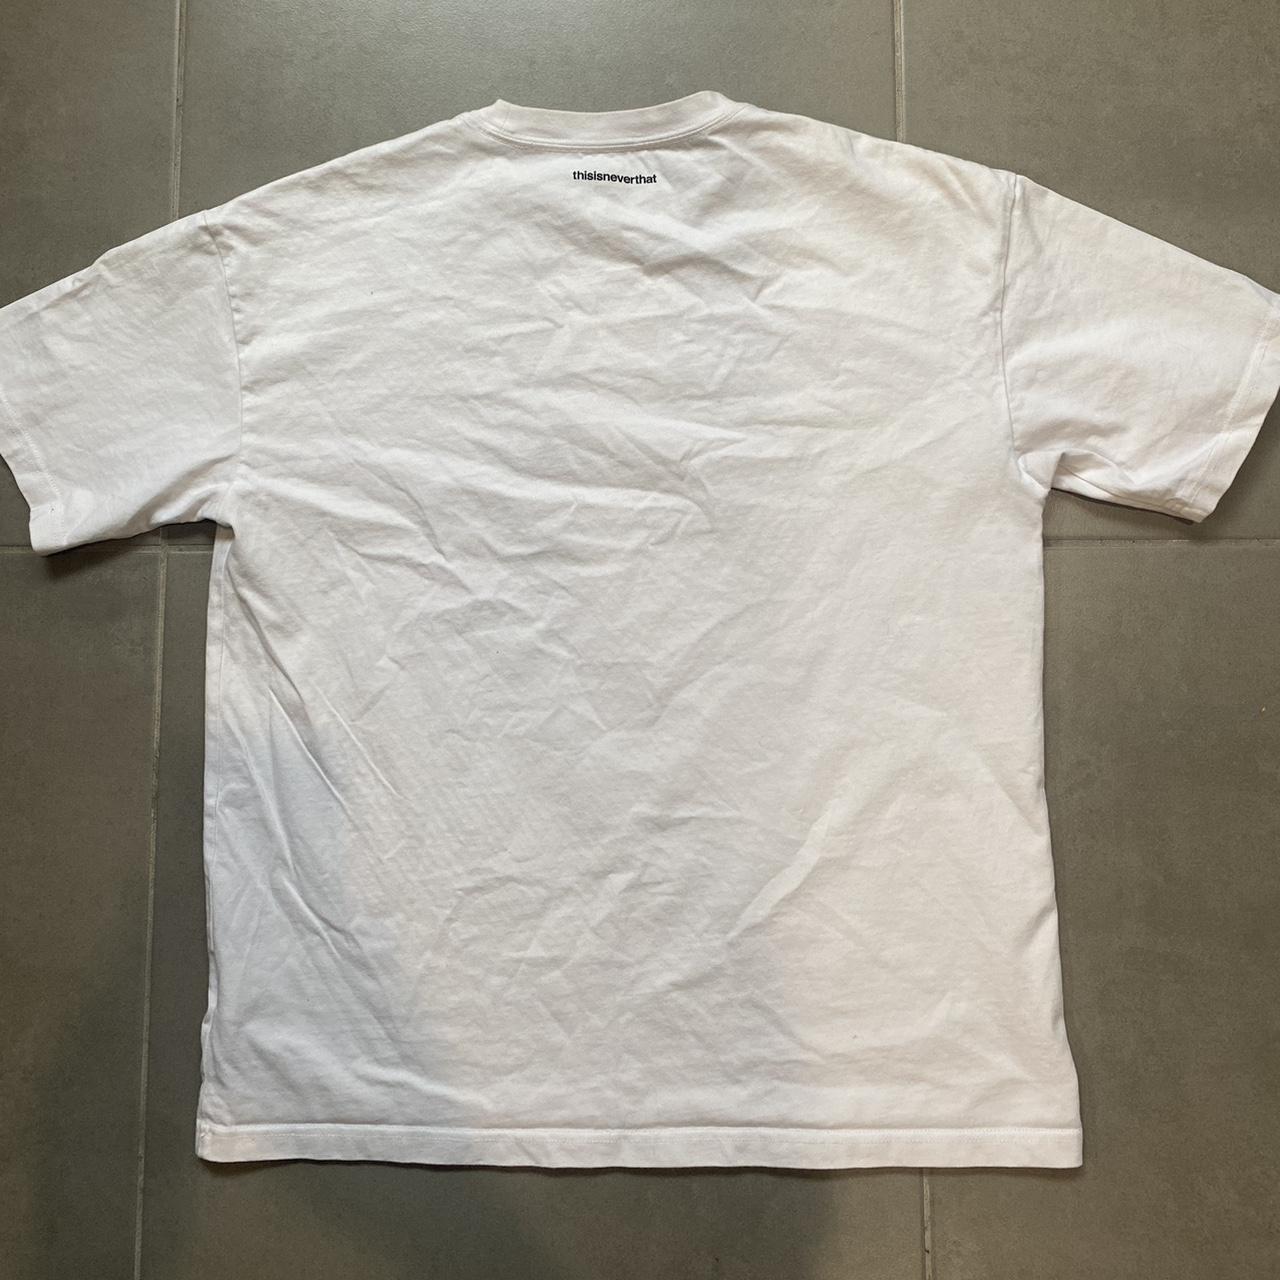 Thisisneverthat x Converse White Tee Some... - Depop